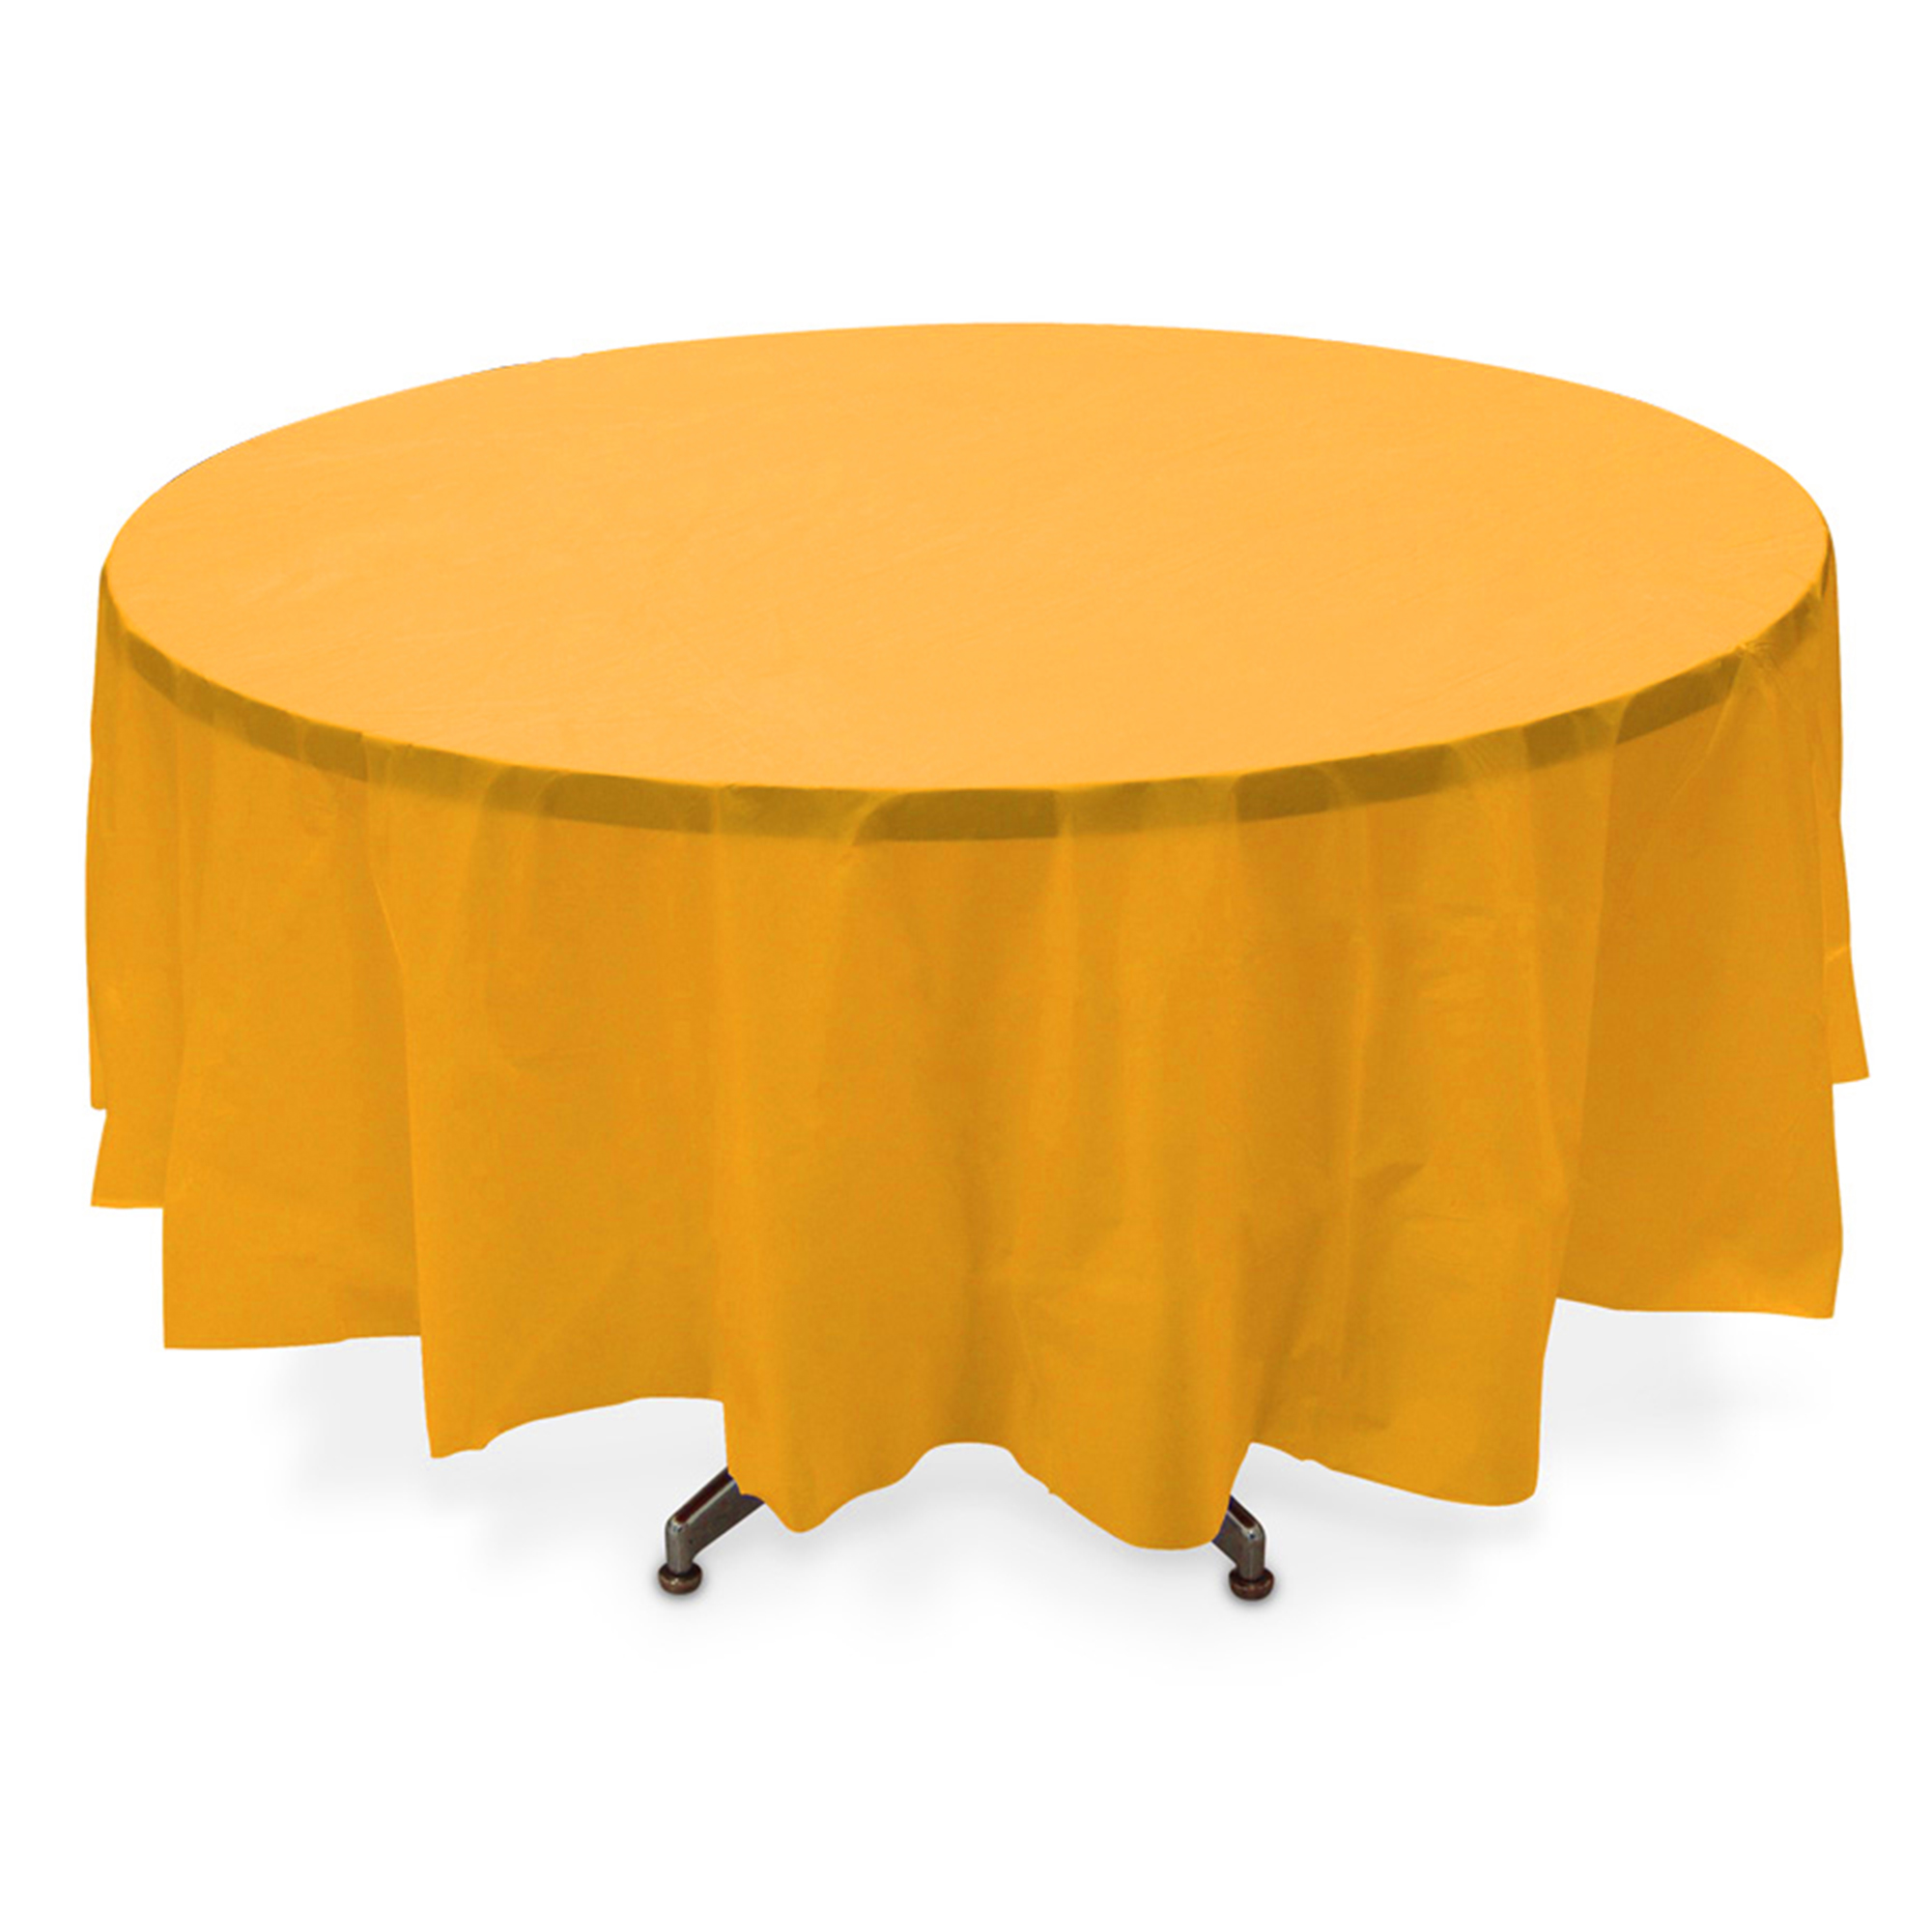 Plastic Round Table Covers - School Bus Yellow 84"